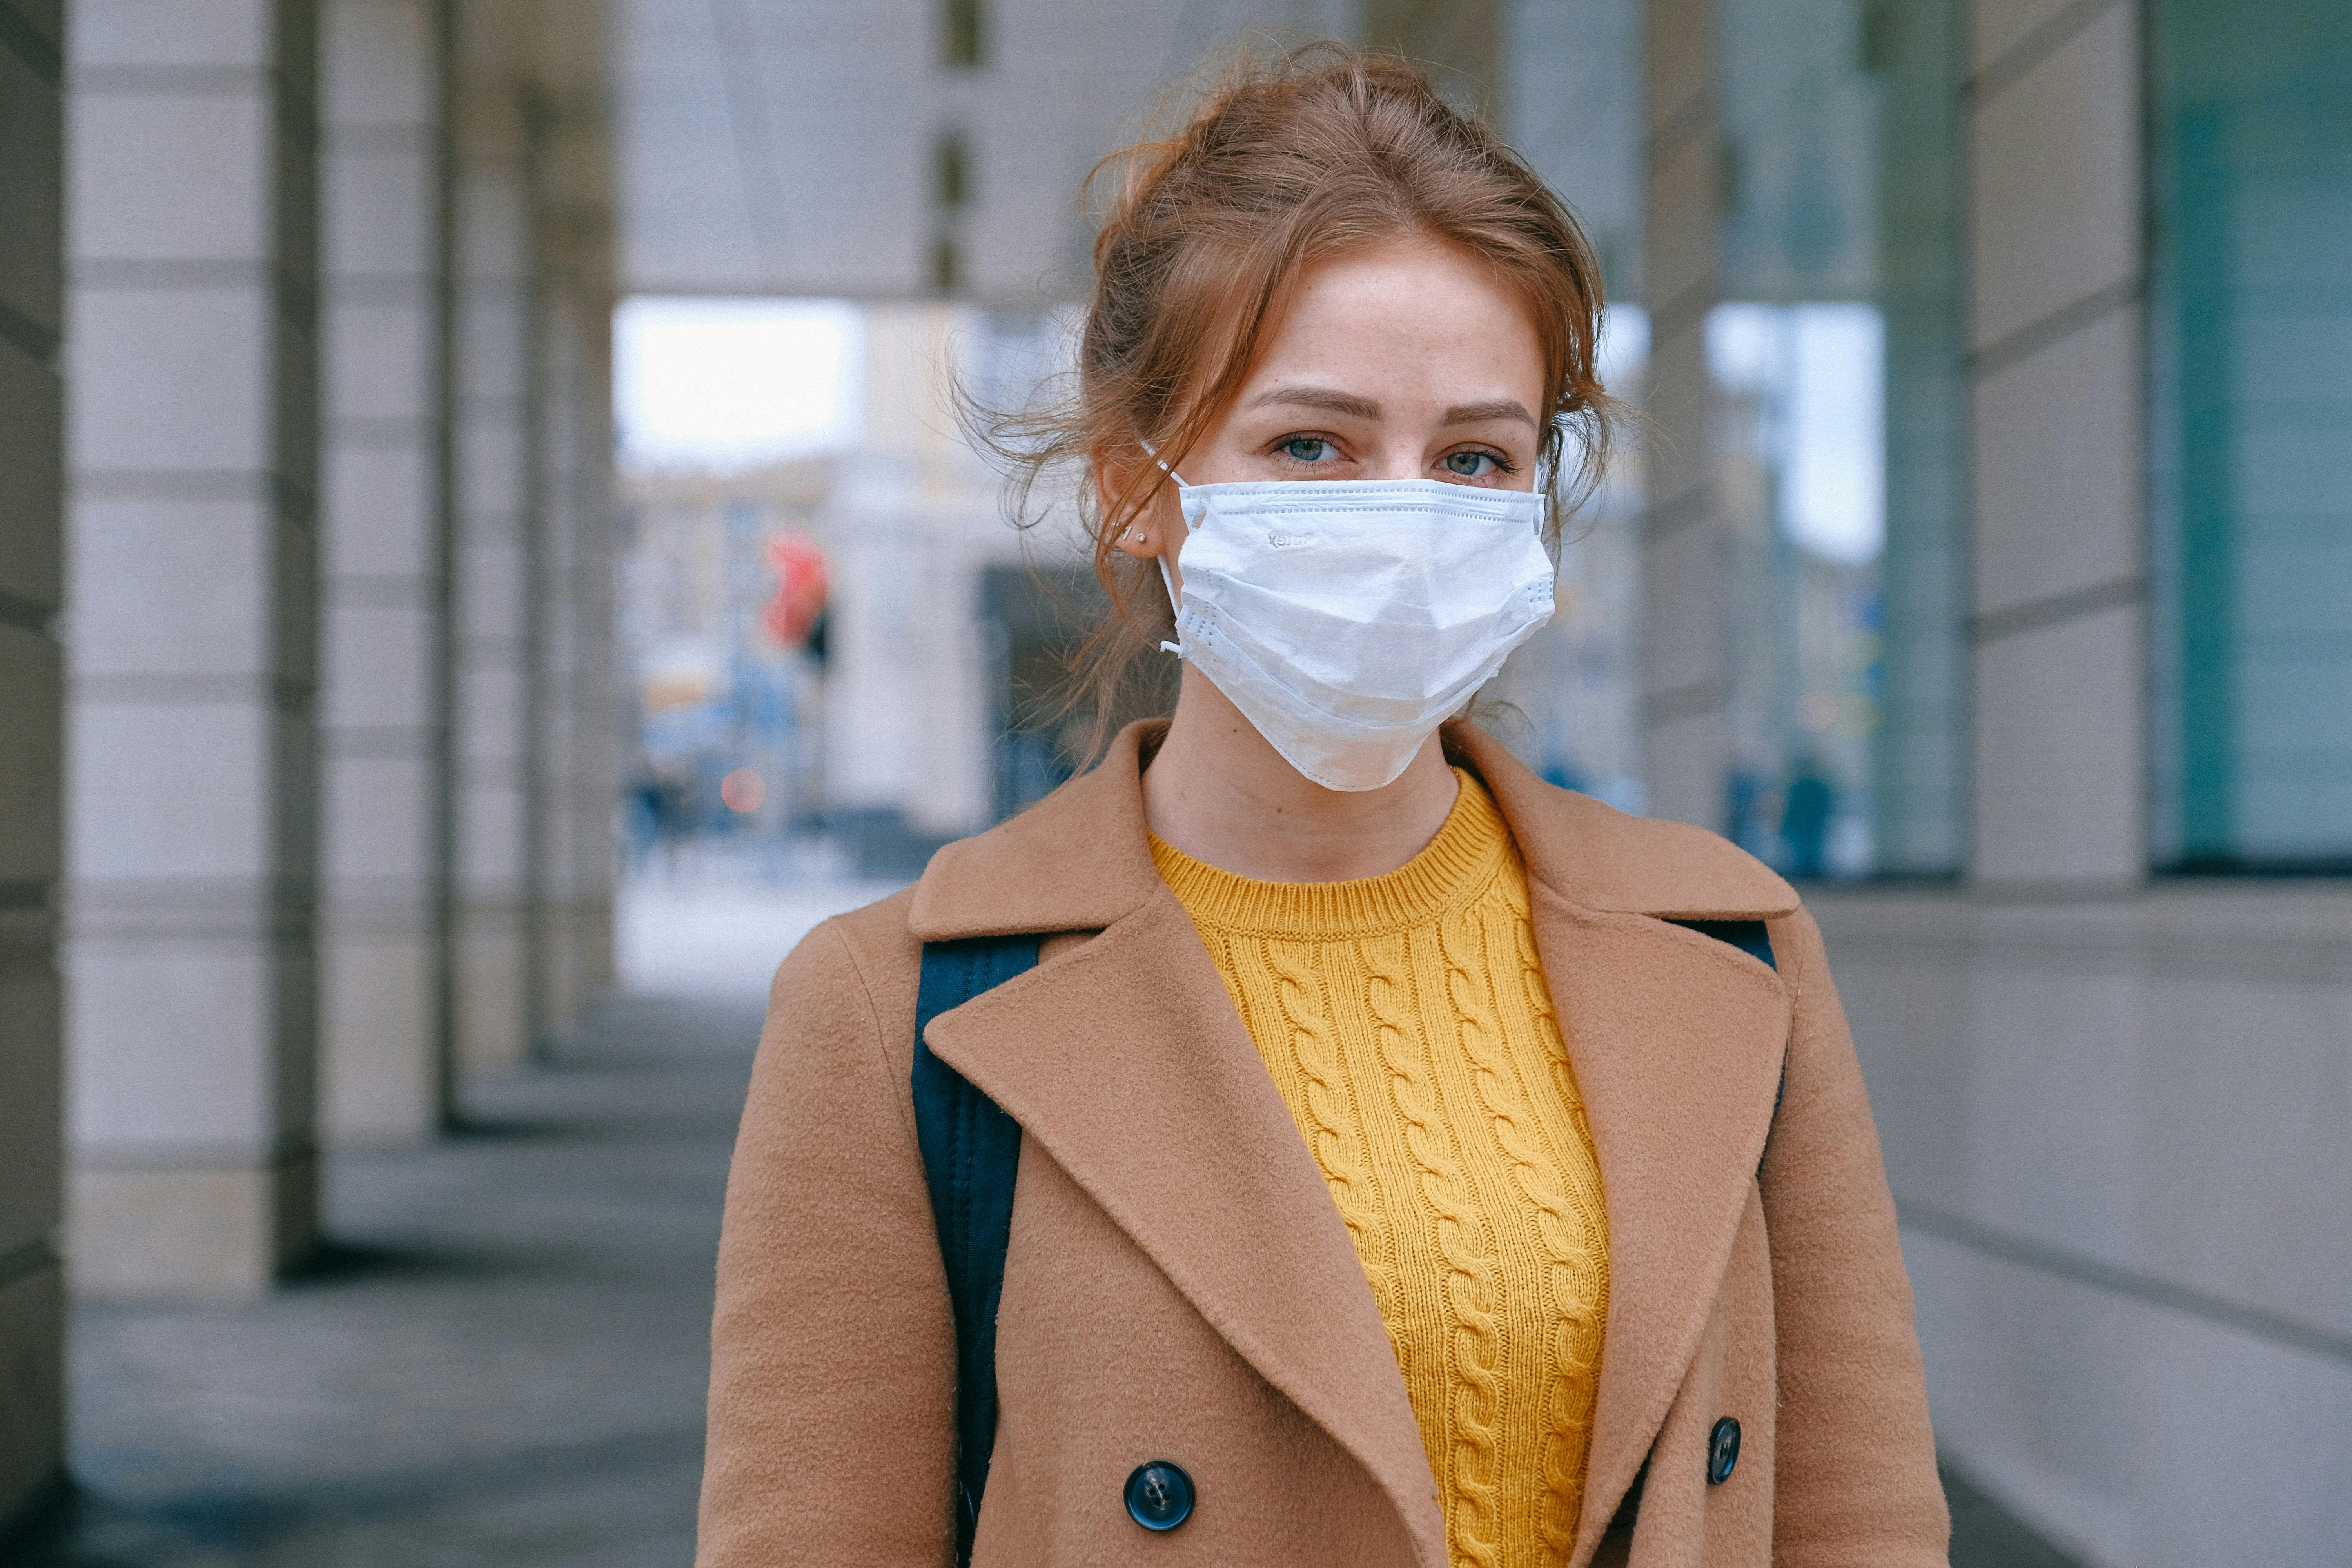 Woman wearing medical face mask to protect against COVID-19